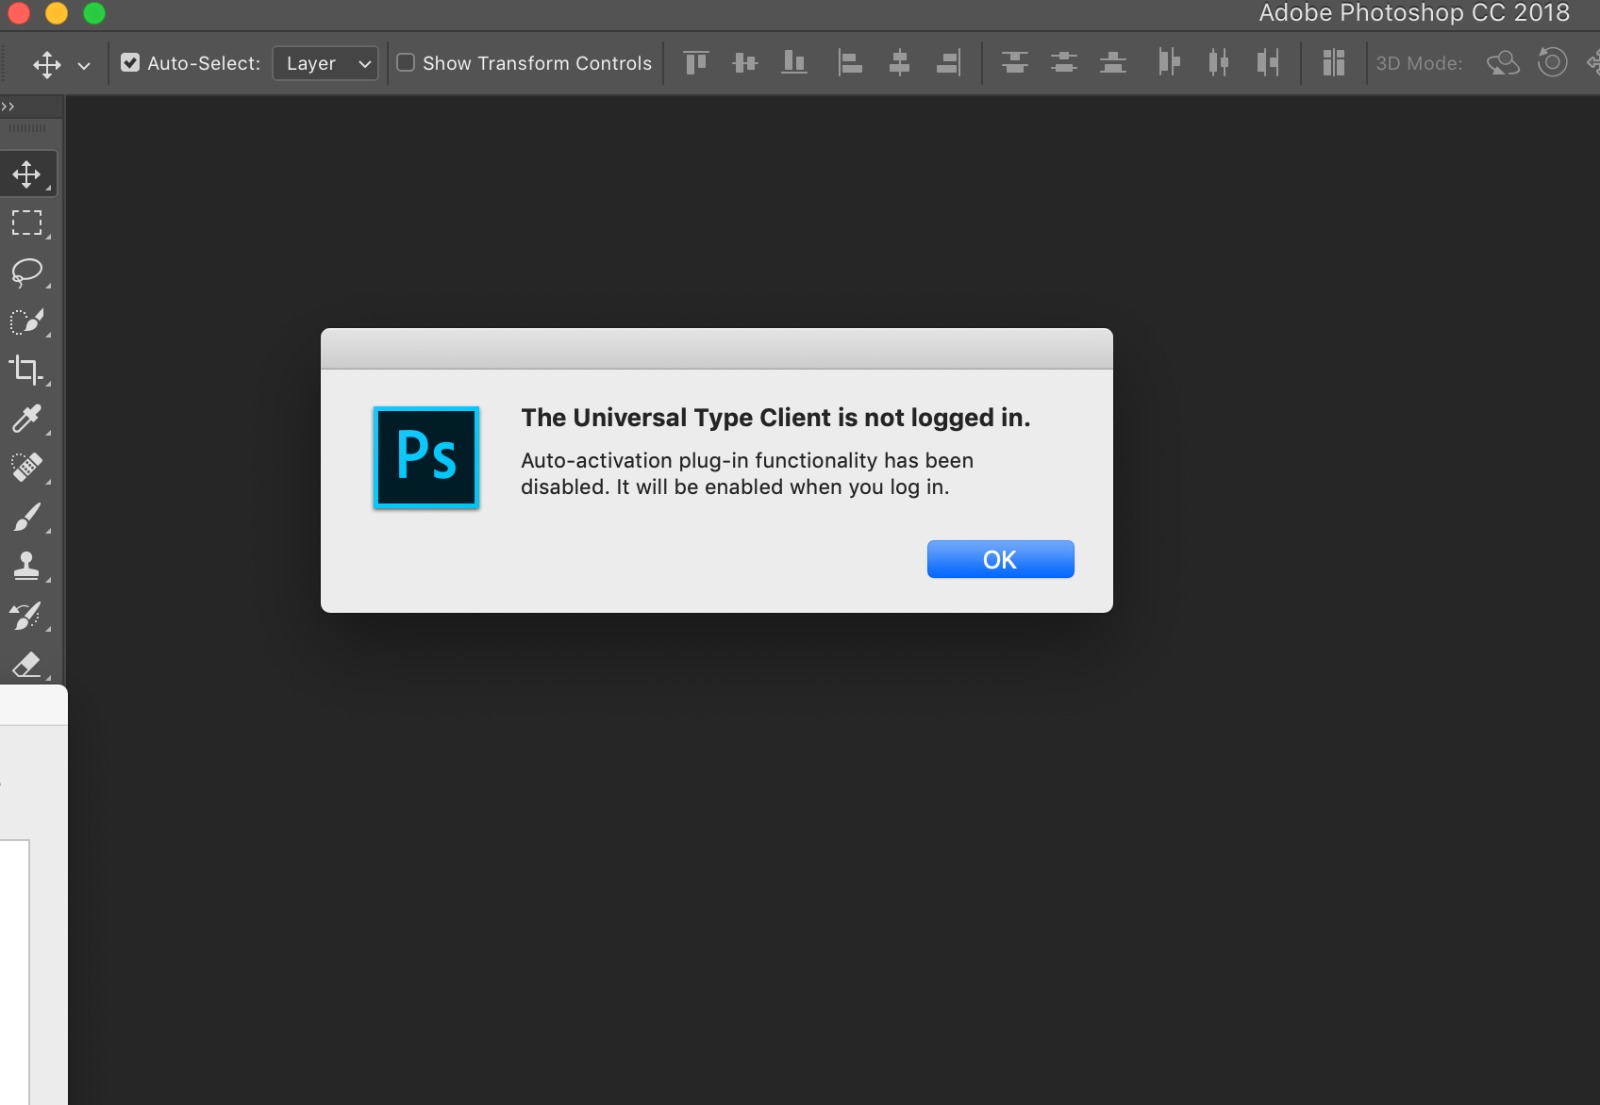 the universal type client is not logged in photosh - Adobe